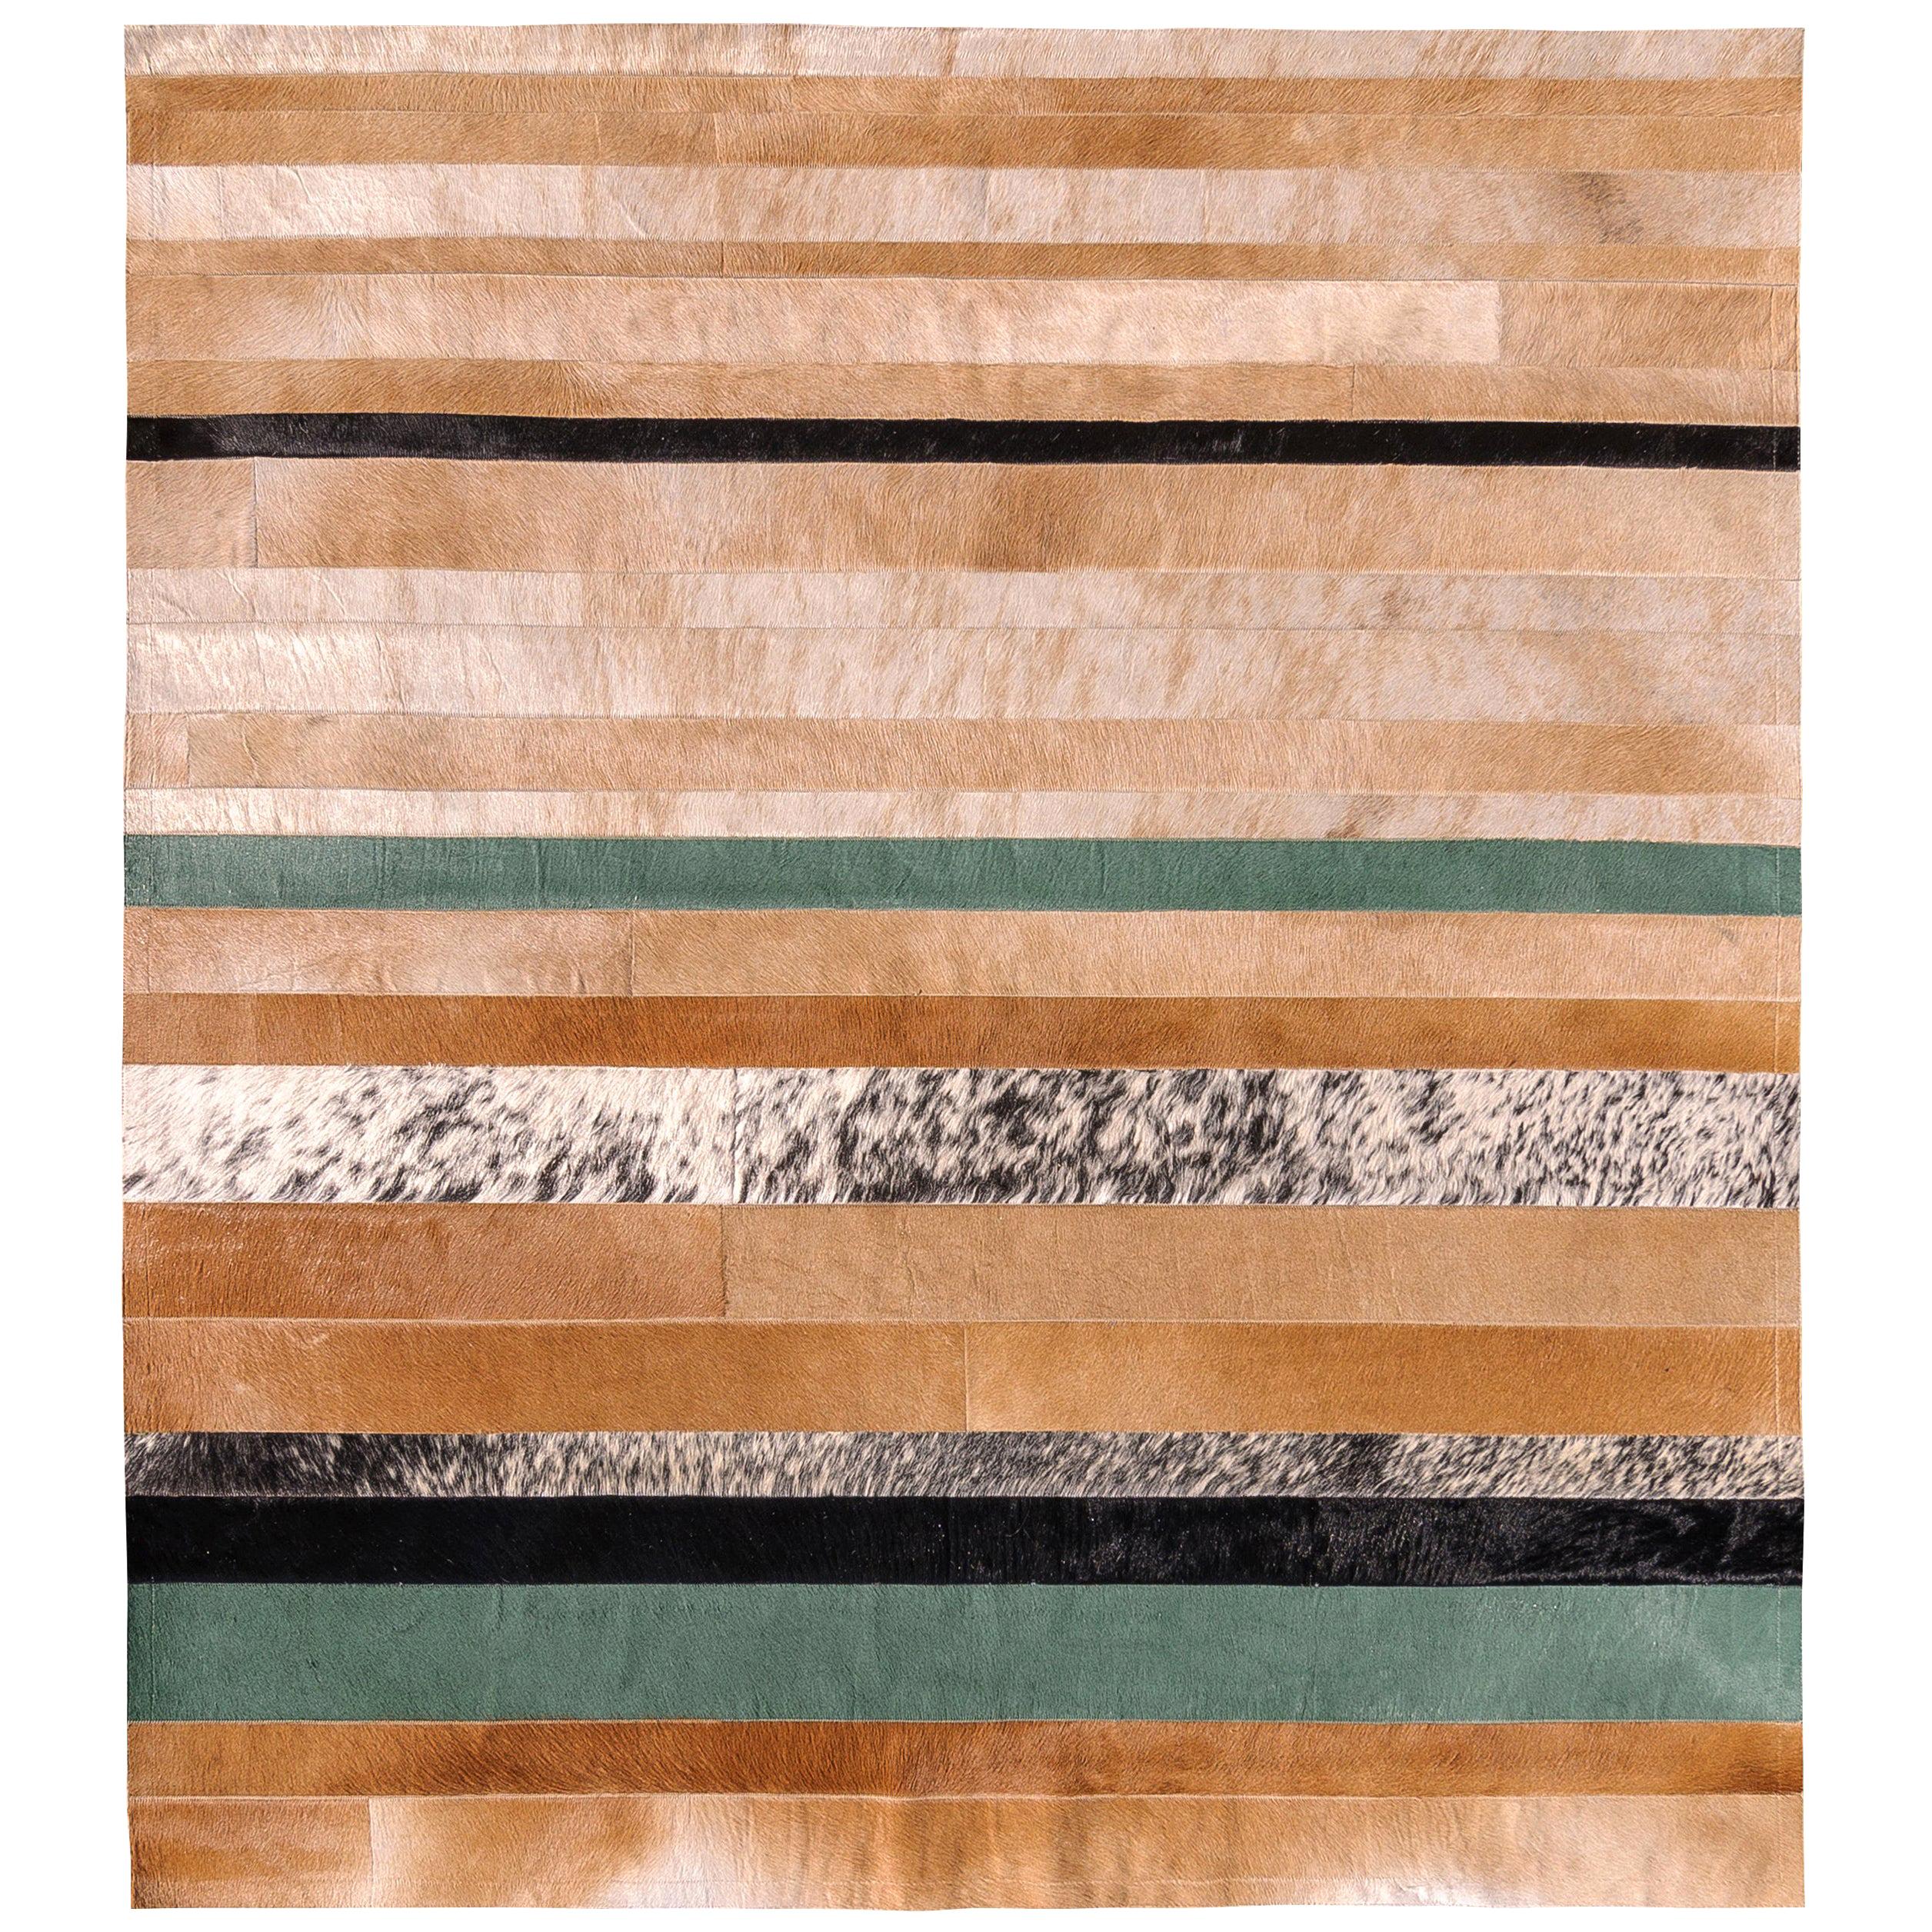 Natural brown, black and green striped Division Cowhide Area Floor Rug Medium 